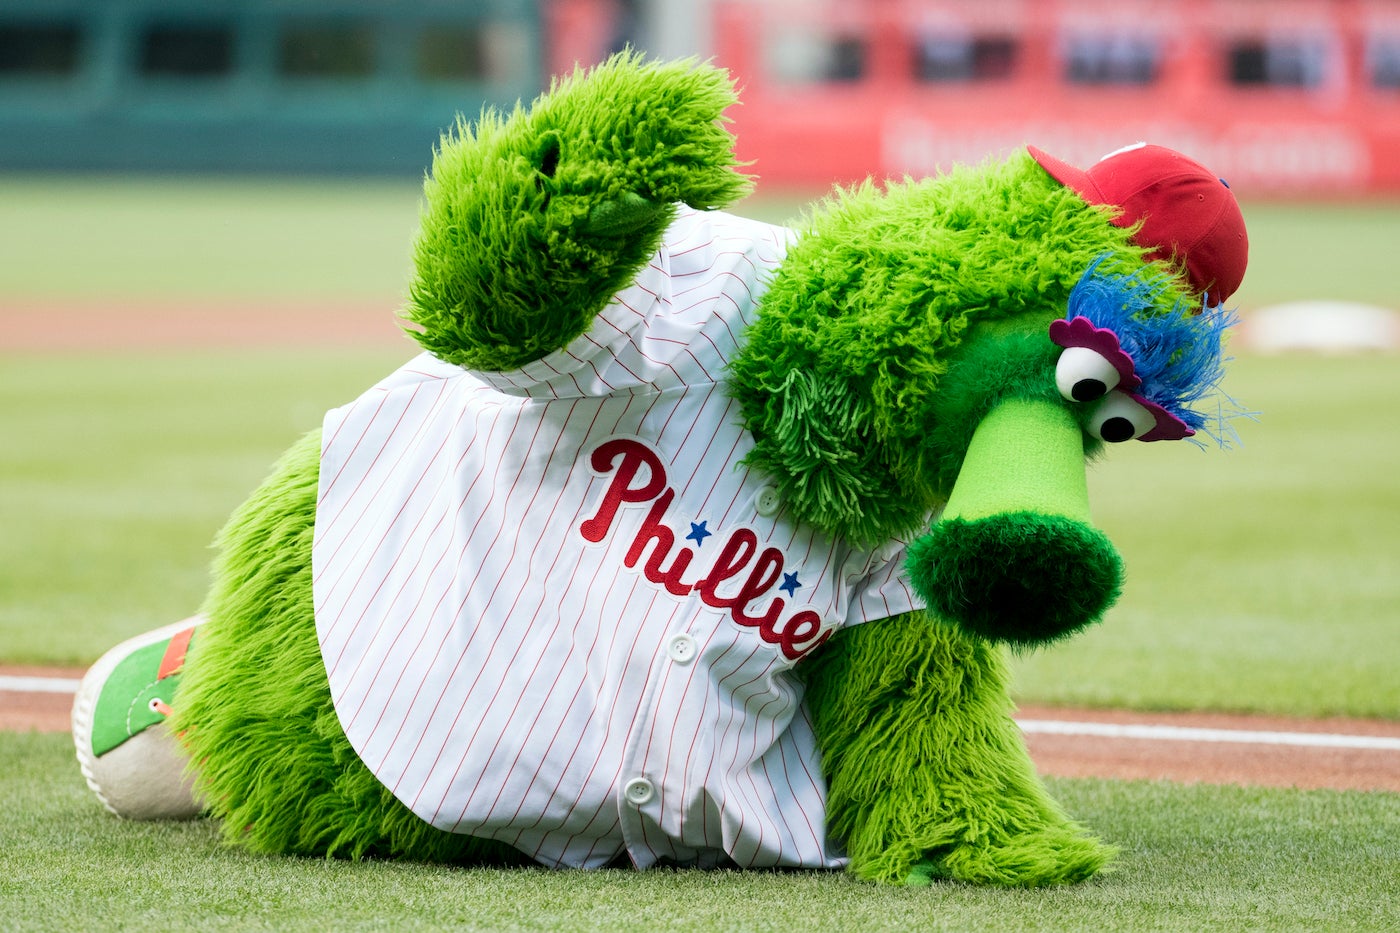 Phanatic pitches in as Phillies gear up for spring training, Berks  Regional News